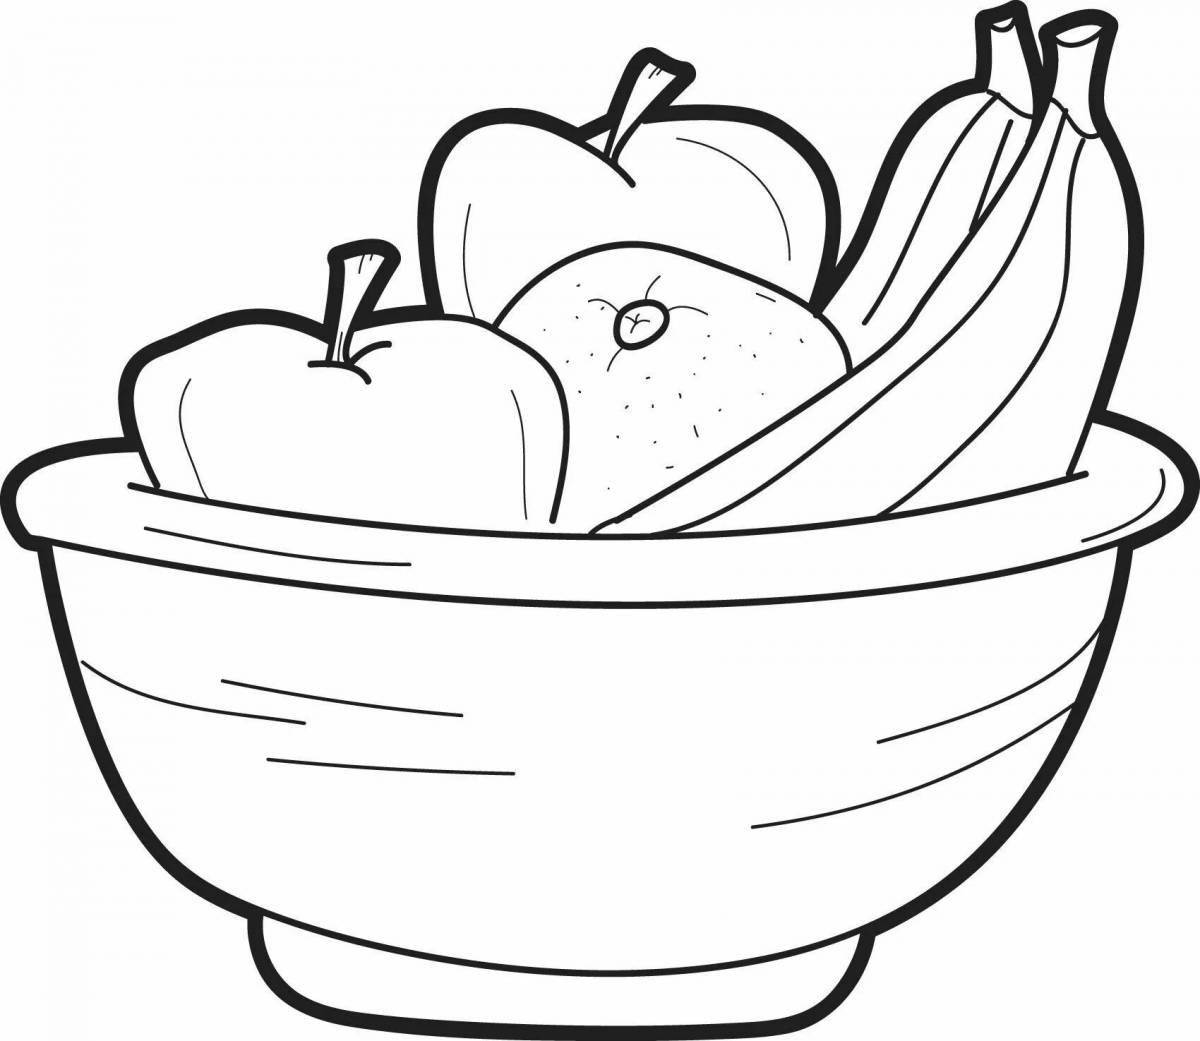 Cute fruit plate coloring book for kids